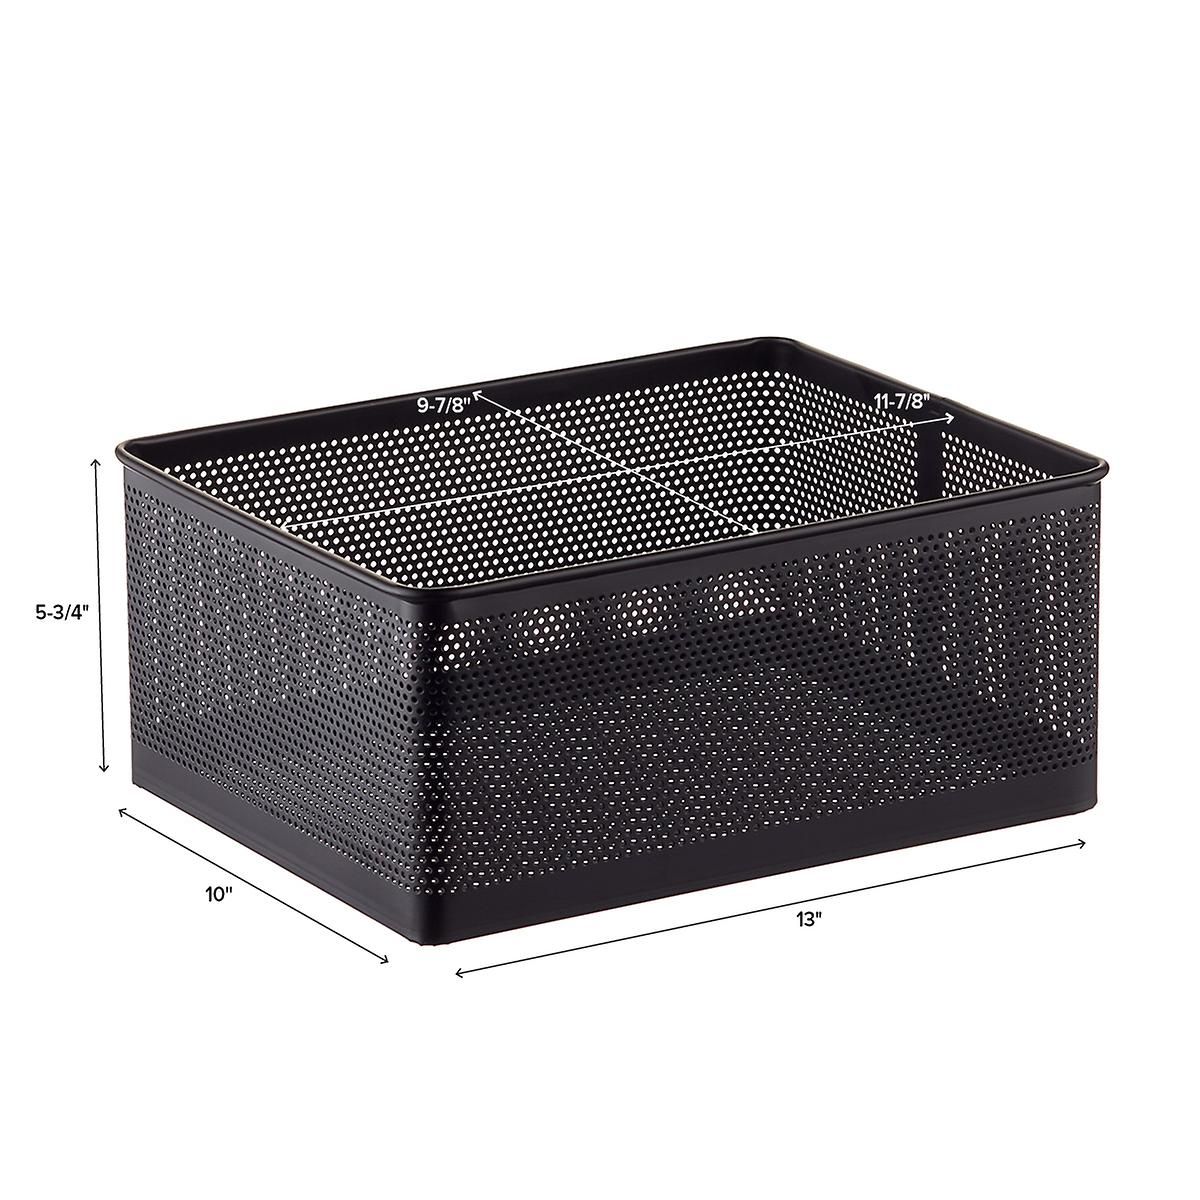 The Container Store Wide Serena Stamped Metal Bin Black | The Container Store